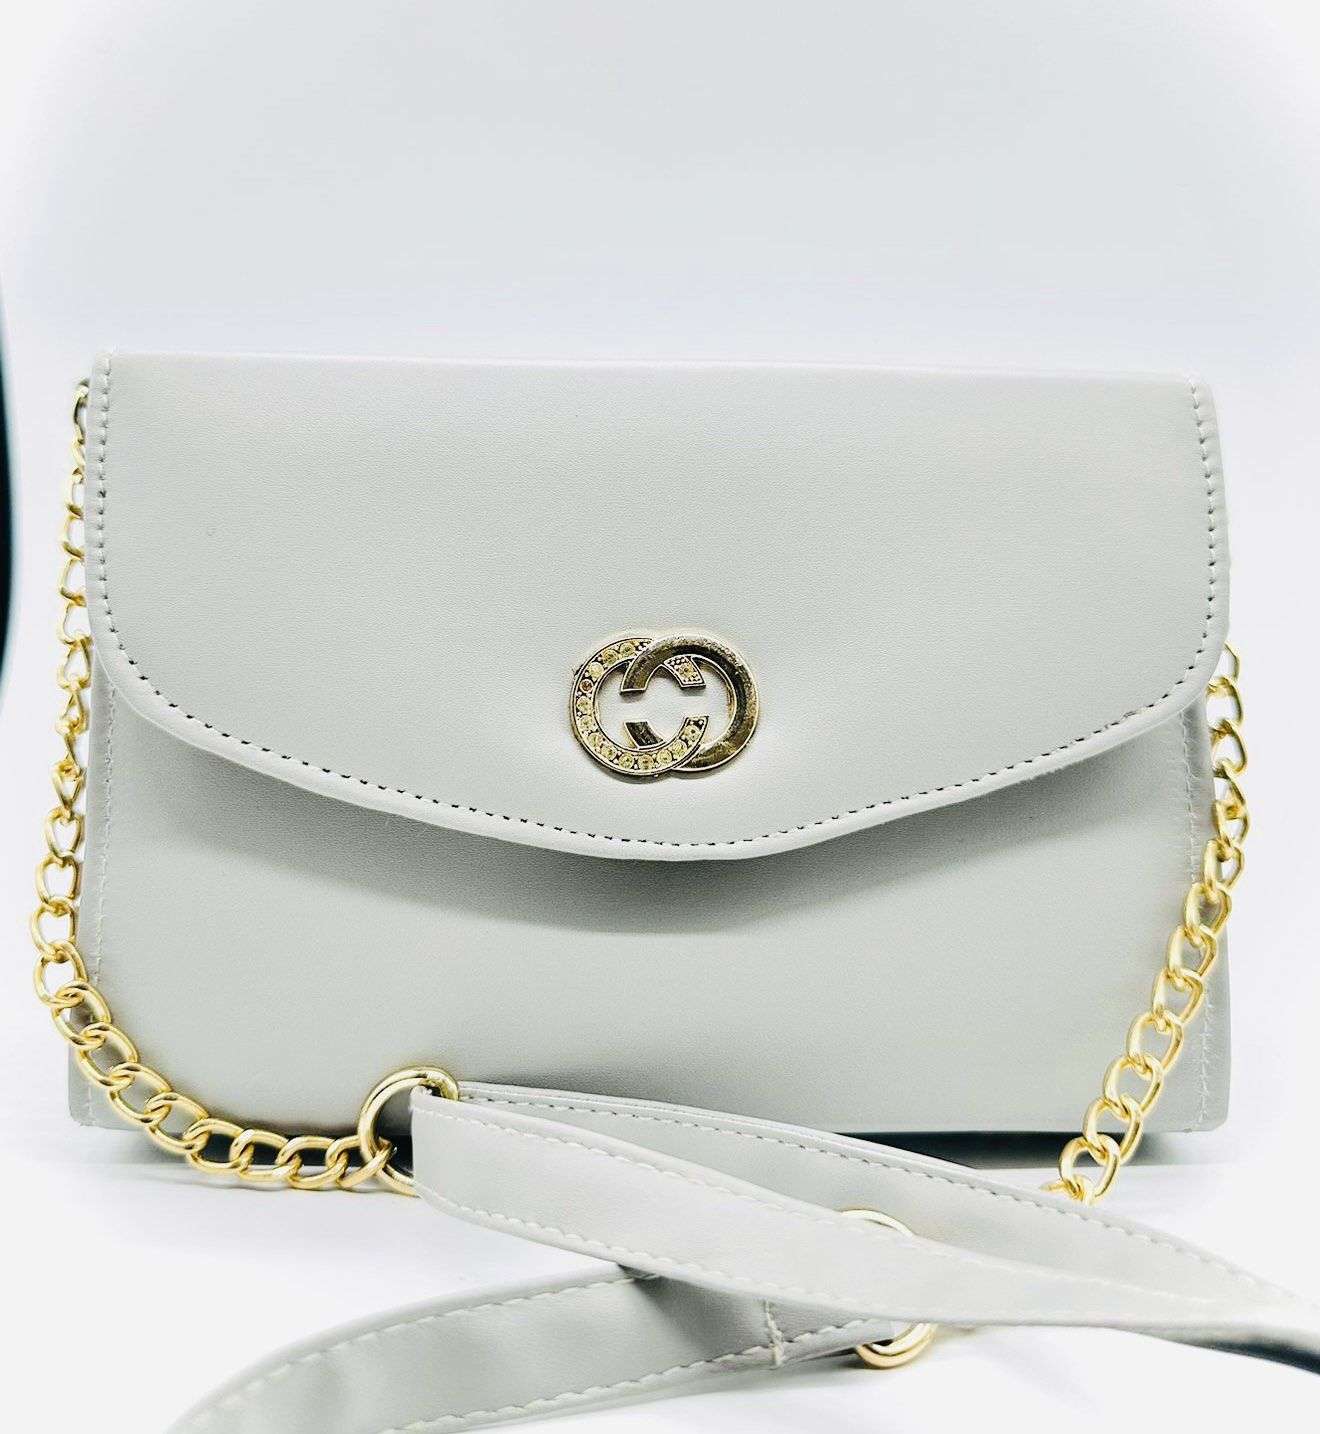 Handbags for Gifts | Order Online Handbags for Gifting - FNP